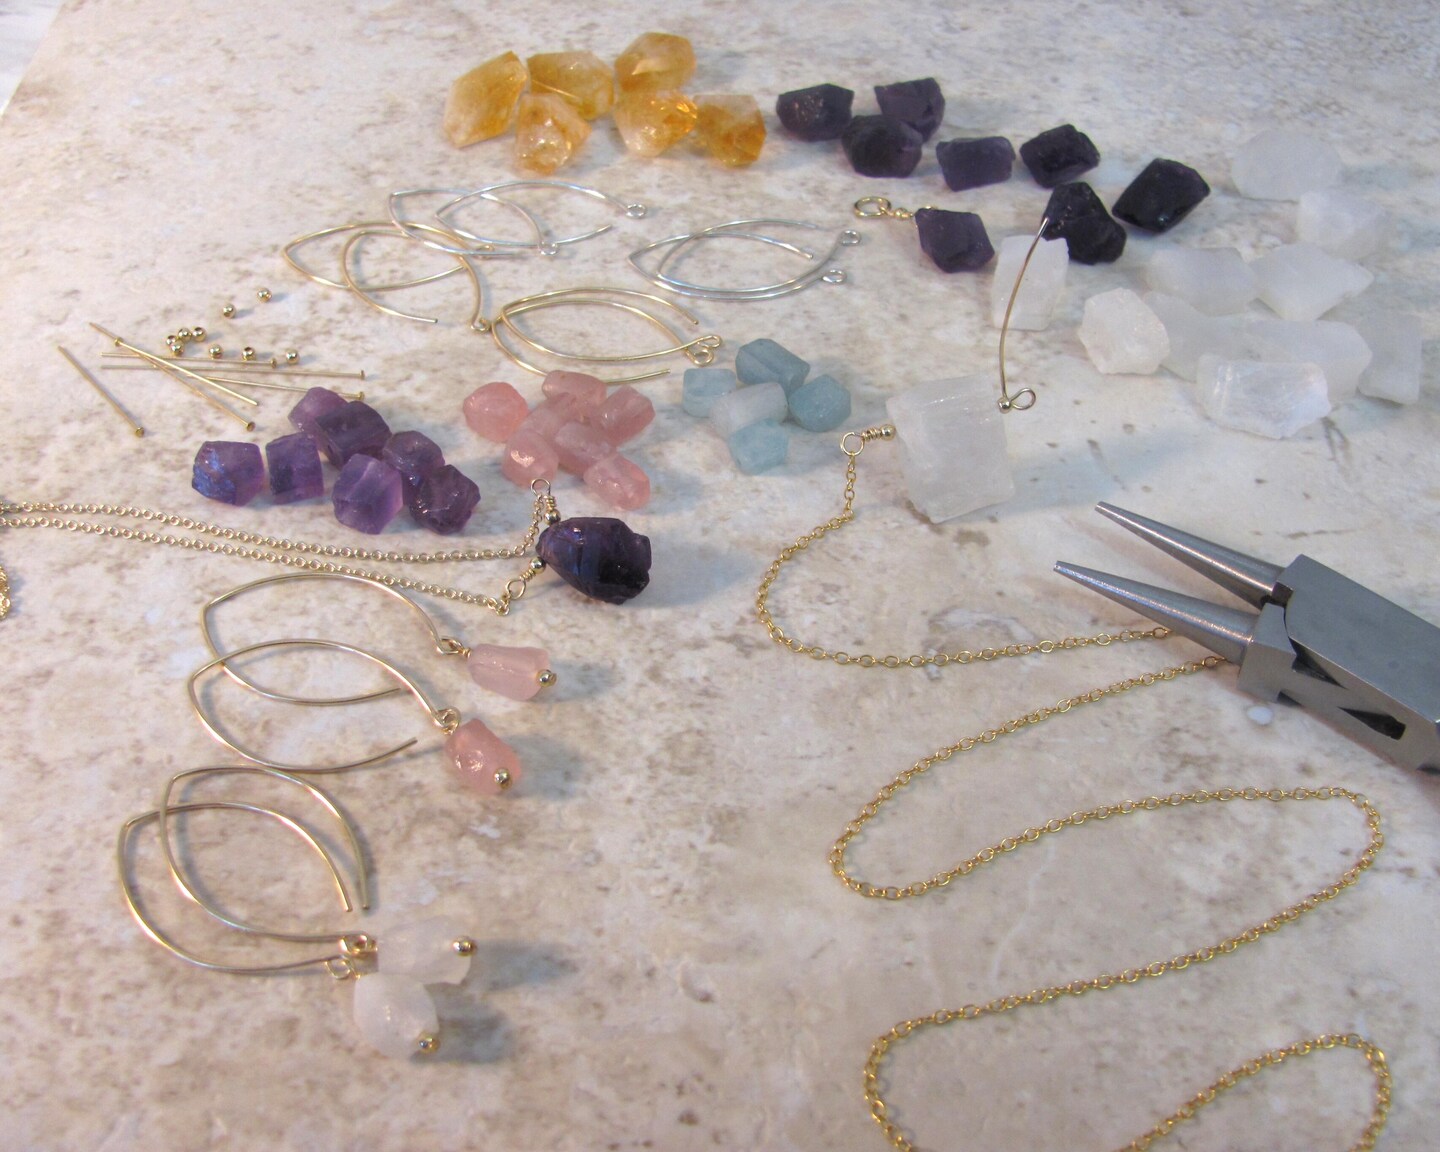 Small Crystals Jewelry Making, Small Stone Jewelry Making